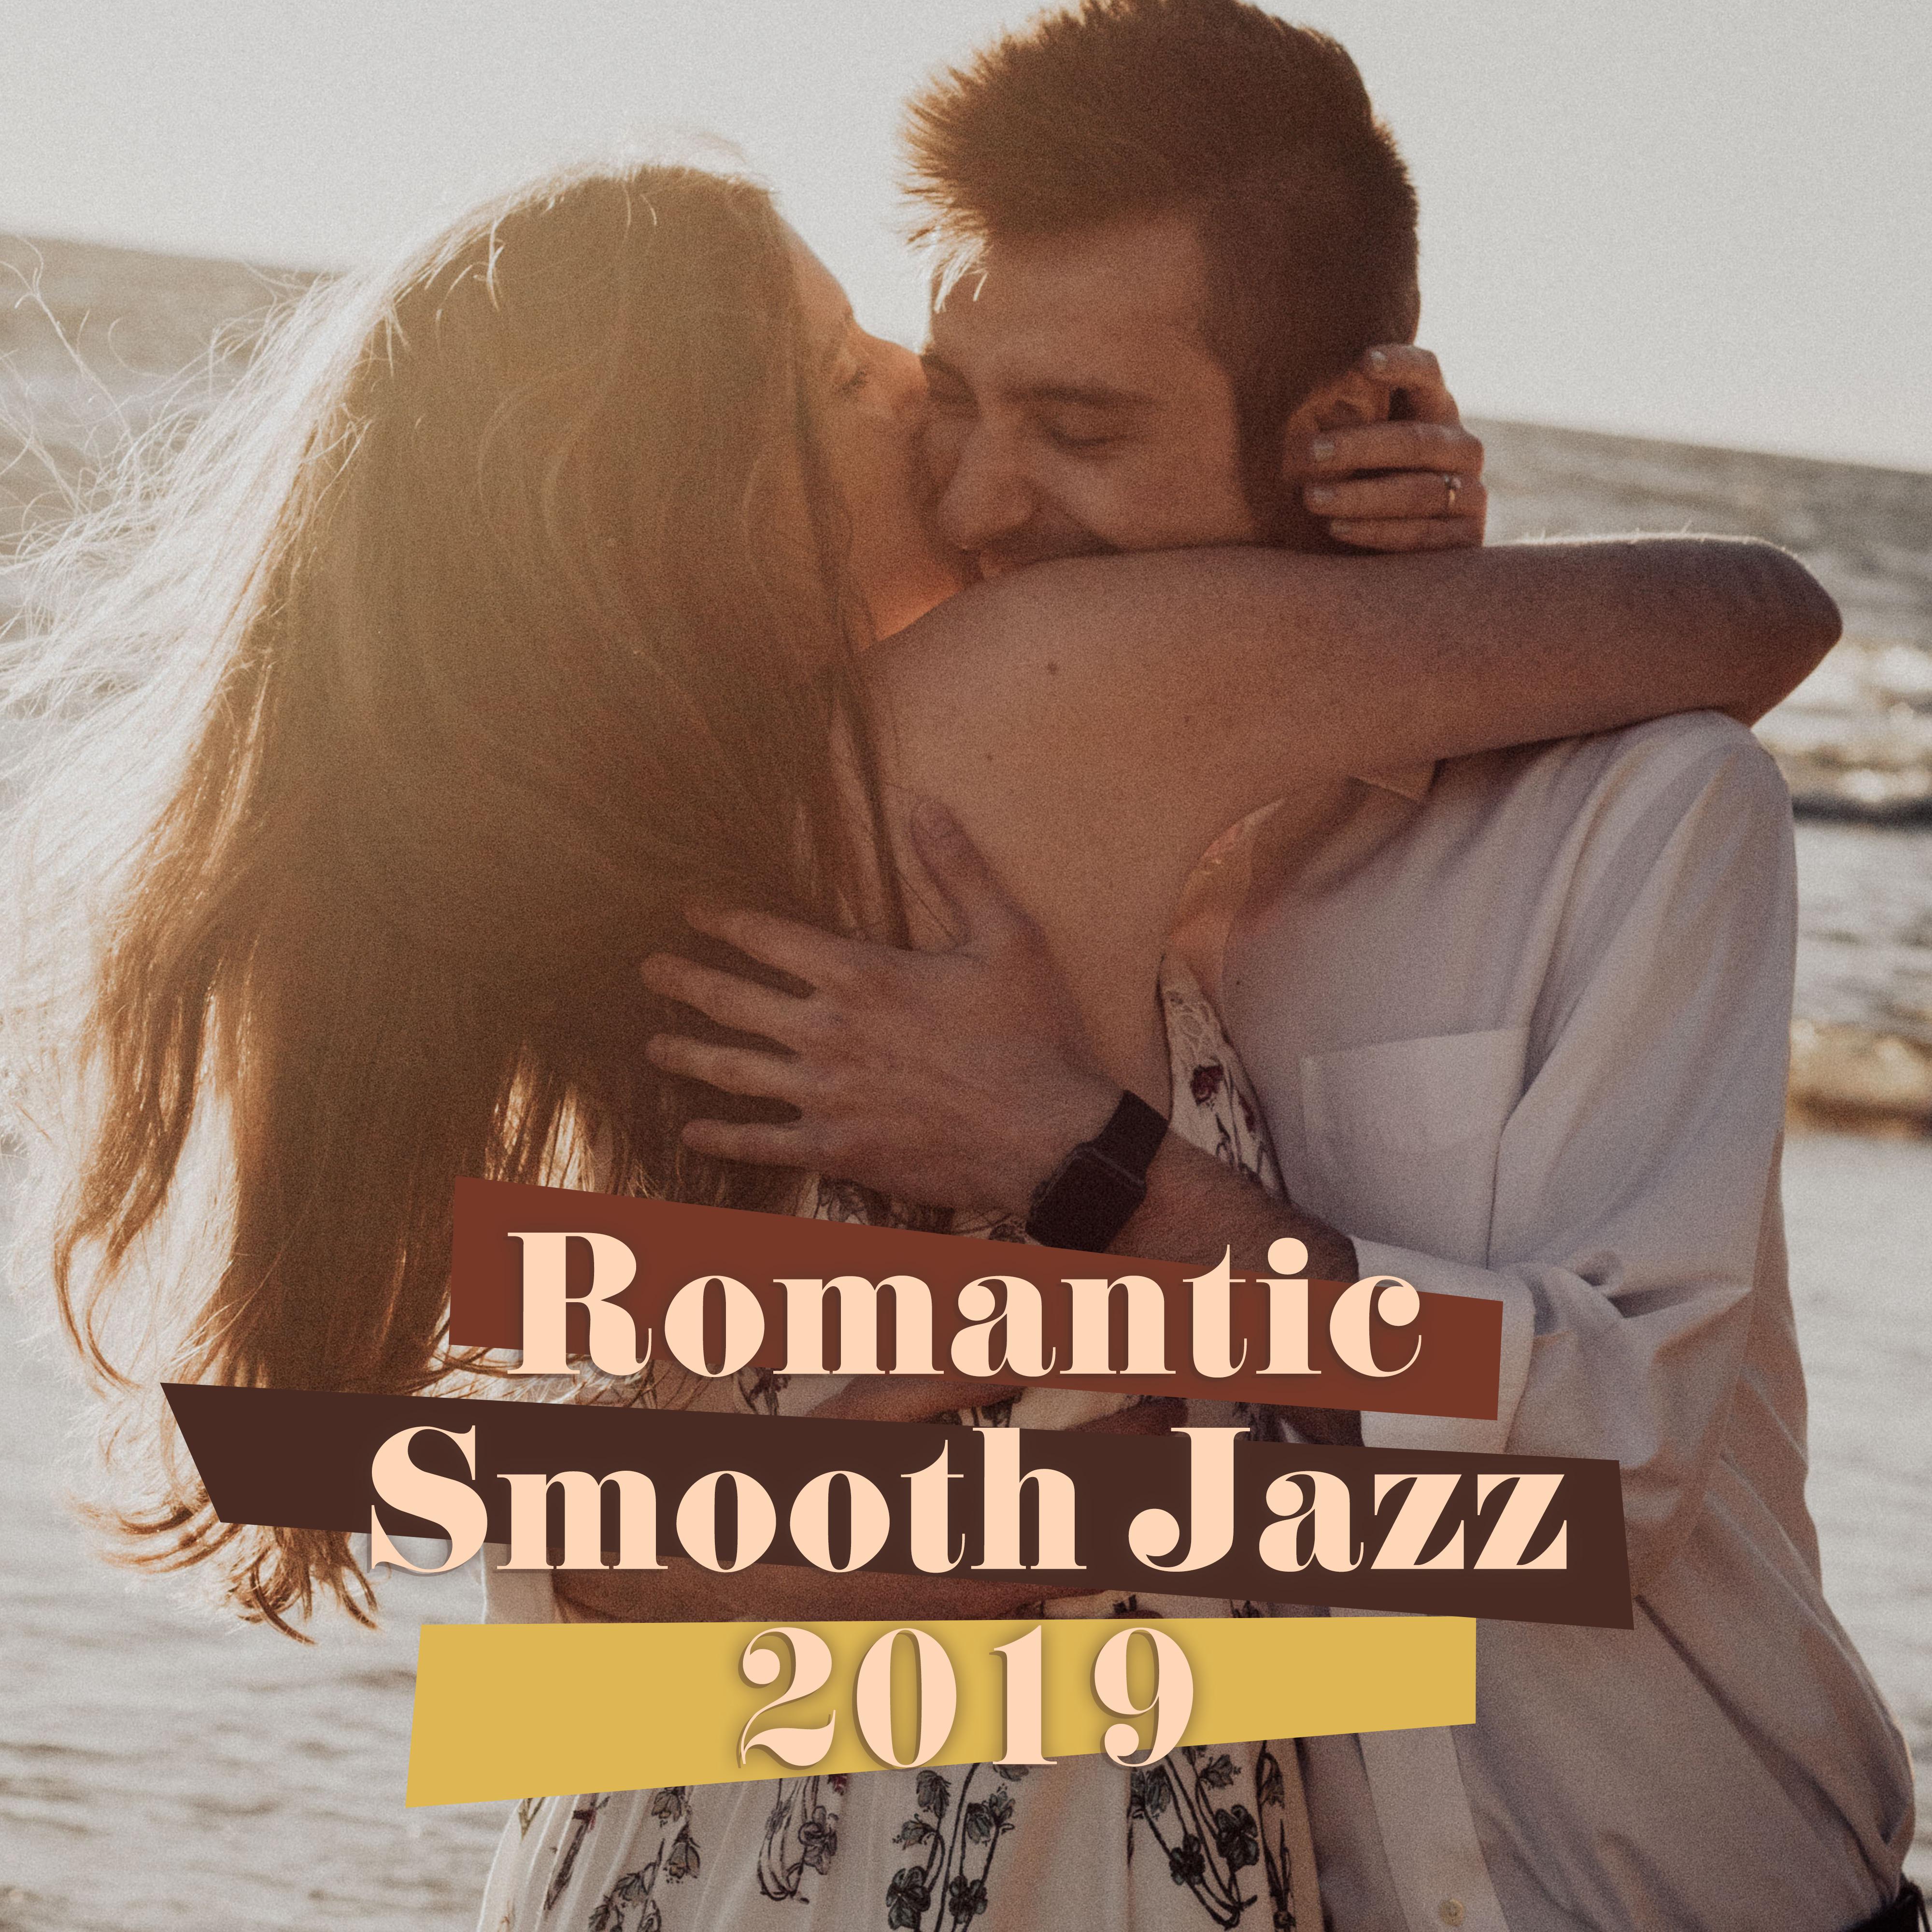 Romantic Smooth Jazz 2019 – Jazz Relaxation for Lovers, Sensual Melodies at Night, Making Love, Hot Jazz for Lovers